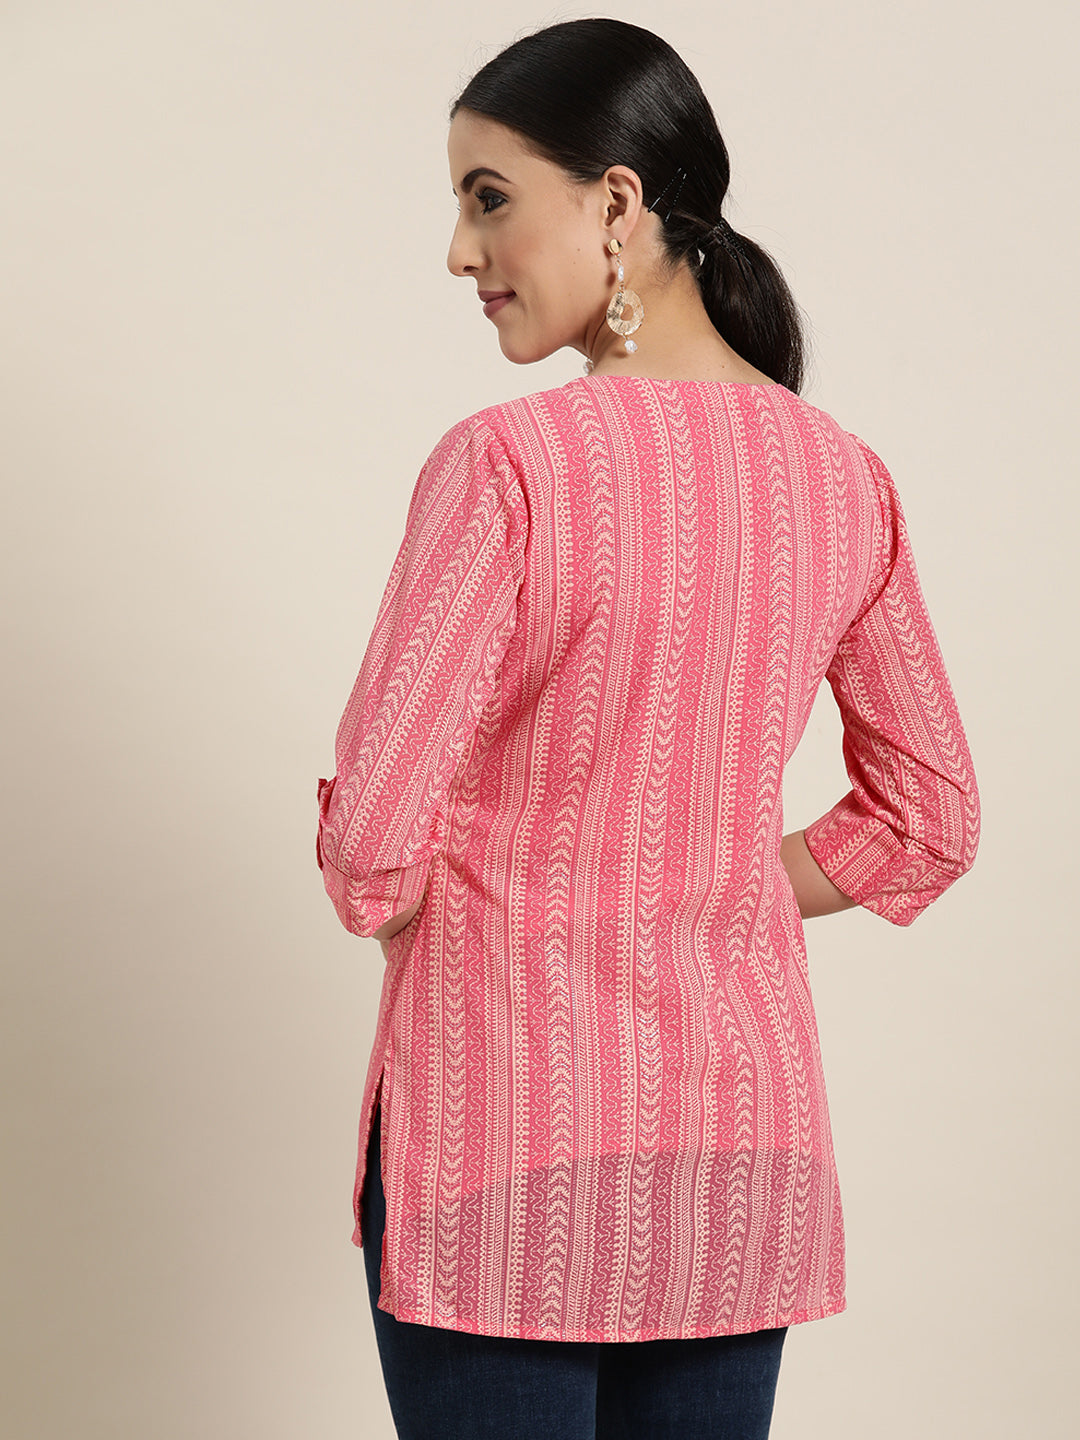 Women's  Pink Georgette Printed High-Low Tunic - Final Clearance Sale